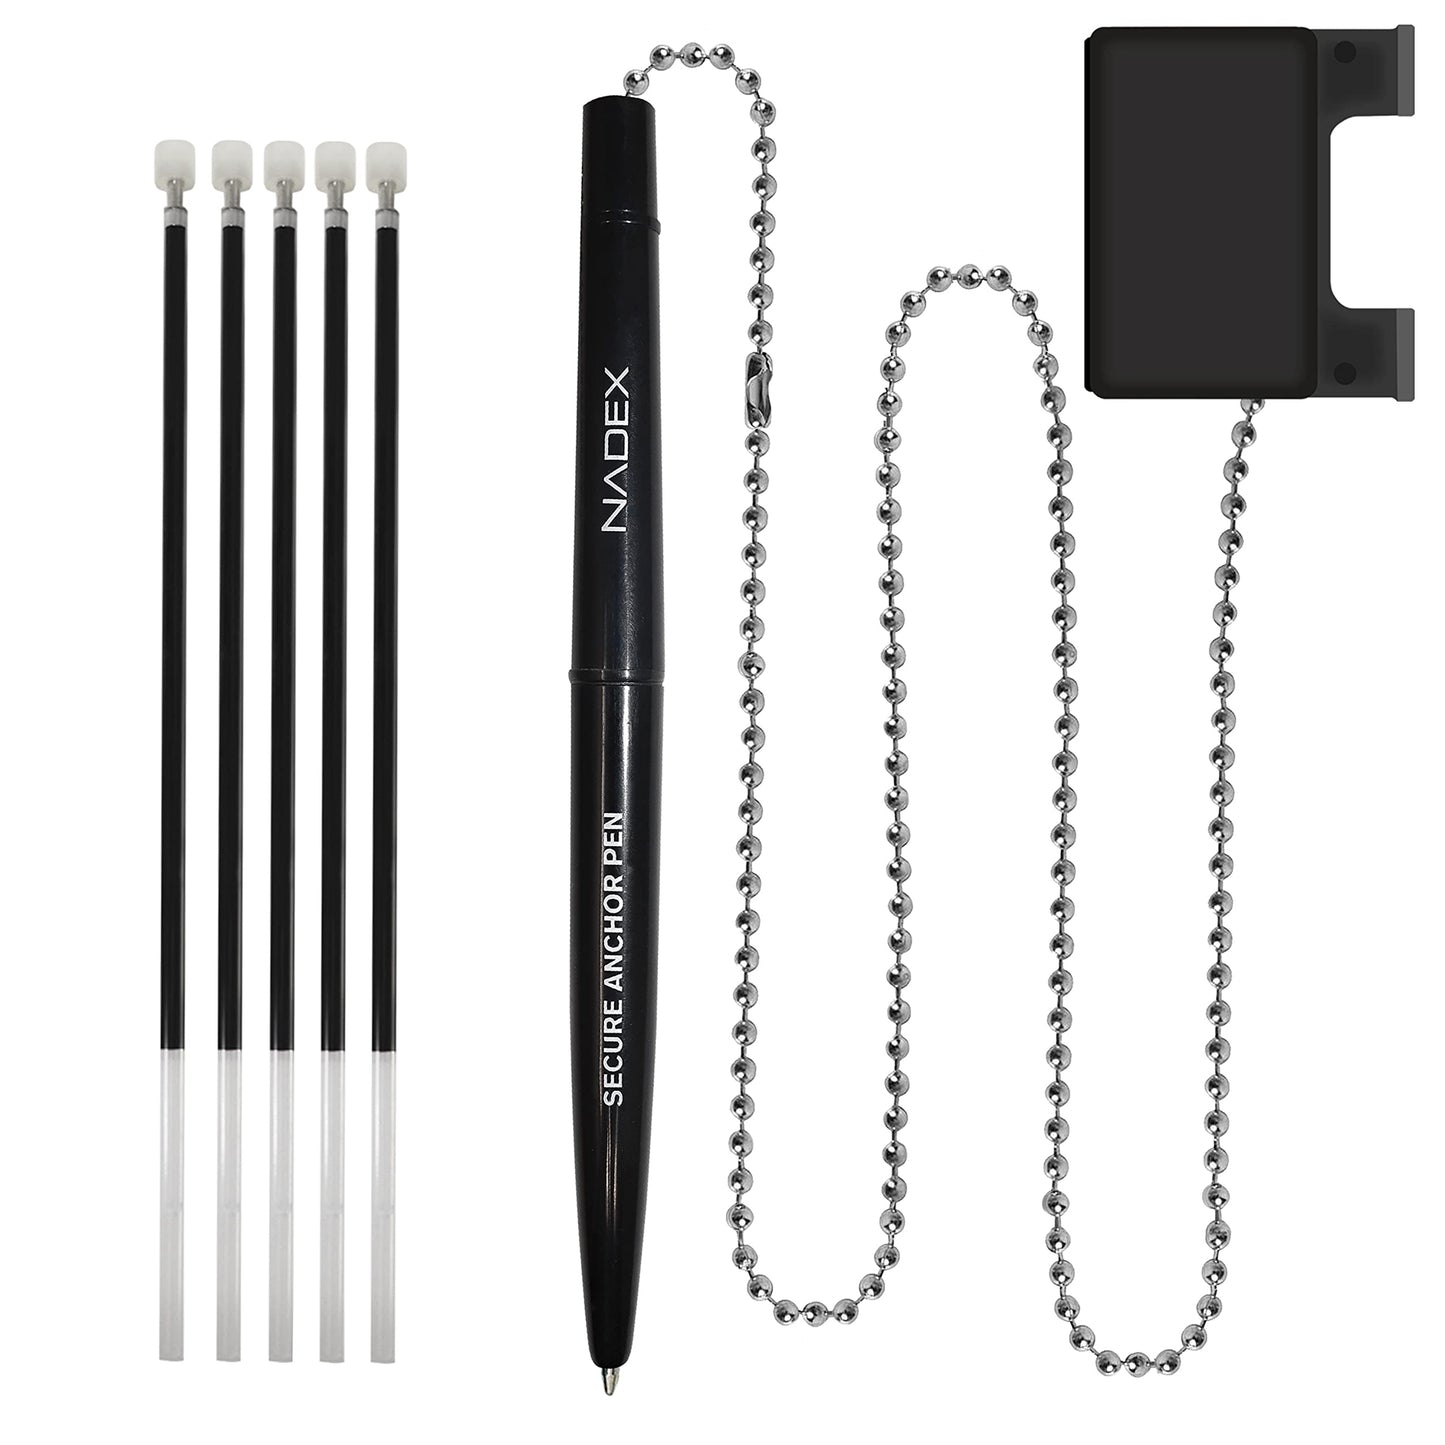 Ball and Chain Security Pen Set | 4 Pens, 1 Adhesive Mount, and 5 Refills (Black)